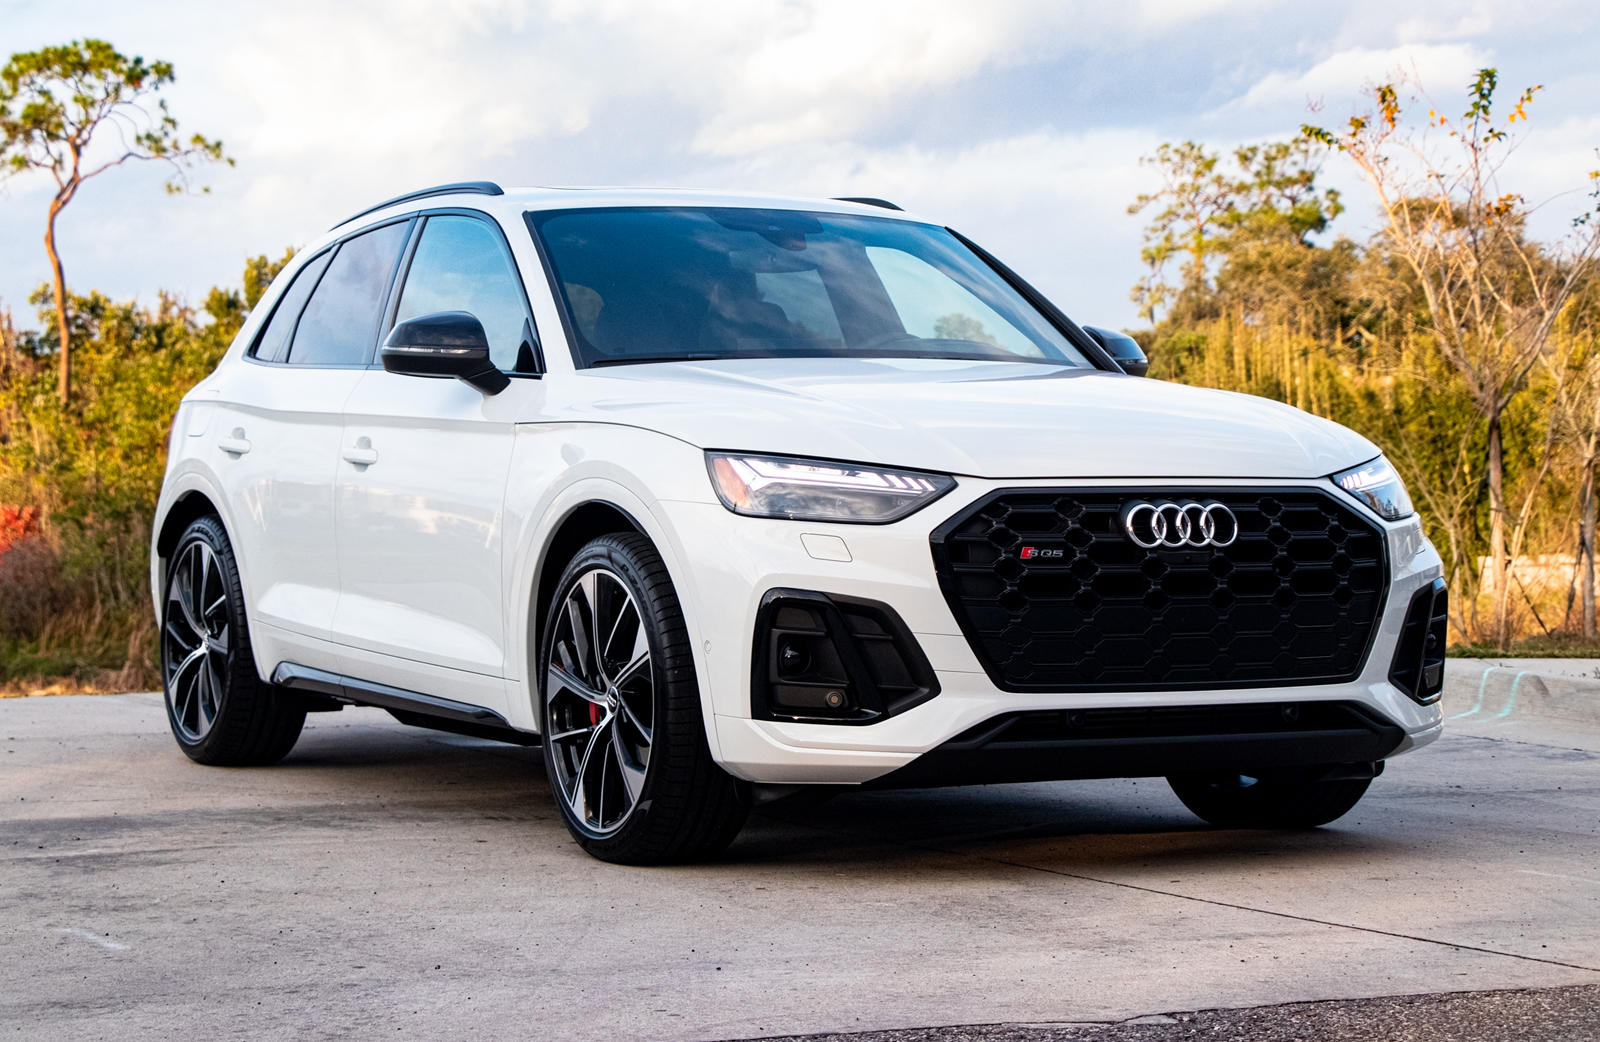 Used Audi SQ5 For Sale in Houston, TX 